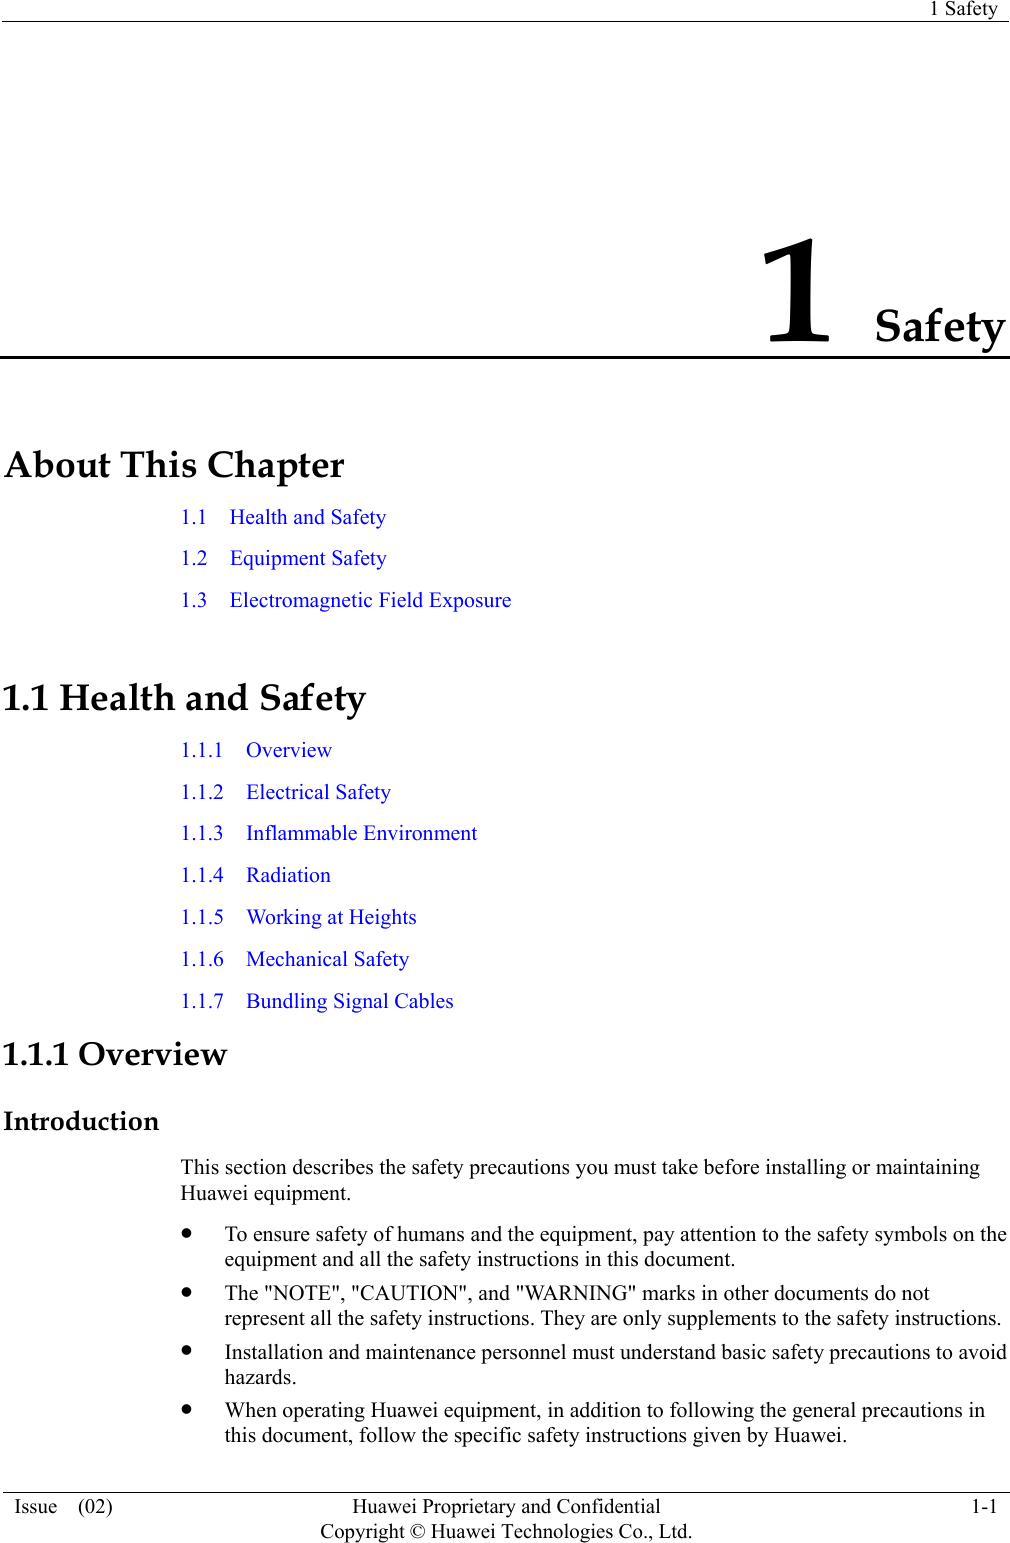   1 Safety  Issue  (02)  Huawei Proprietary and Confidential     Copyright © Huawei Technologies Co., Ltd. 1-1  1 Safety About This Chapter 1.1  Health and Safety 1.2  Equipment Safety 1.3  Electromagnetic Field Exposure 1.1 Health and Safety 1.1.1  Overview 1.1.2  Electrical Safety 1.1.3  Inflammable Environment 1.1.4  Radiation 1.1.5  Working at Heights 1.1.6  Mechanical Safety 1.1.7  Bundling Signal Cables 1.1.1 Overview Introduction This section describes the safety precautions you must take before installing or maintaining Huawei equipment.  To ensure safety of humans and the equipment, pay attention to the safety symbols on the equipment and all the safety instructions in this document.  The &quot;NOTE&quot;, &quot;CAUTION&quot;, and &quot;WARNING&quot; marks in other documents do not represent all the safety instructions. They are only supplements to the safety instructions.  Installation and maintenance personnel must understand basic safety precautions to avoid hazards.  When operating Huawei equipment, in addition to following the general precautions in this document, follow the specific safety instructions given by Huawei. 